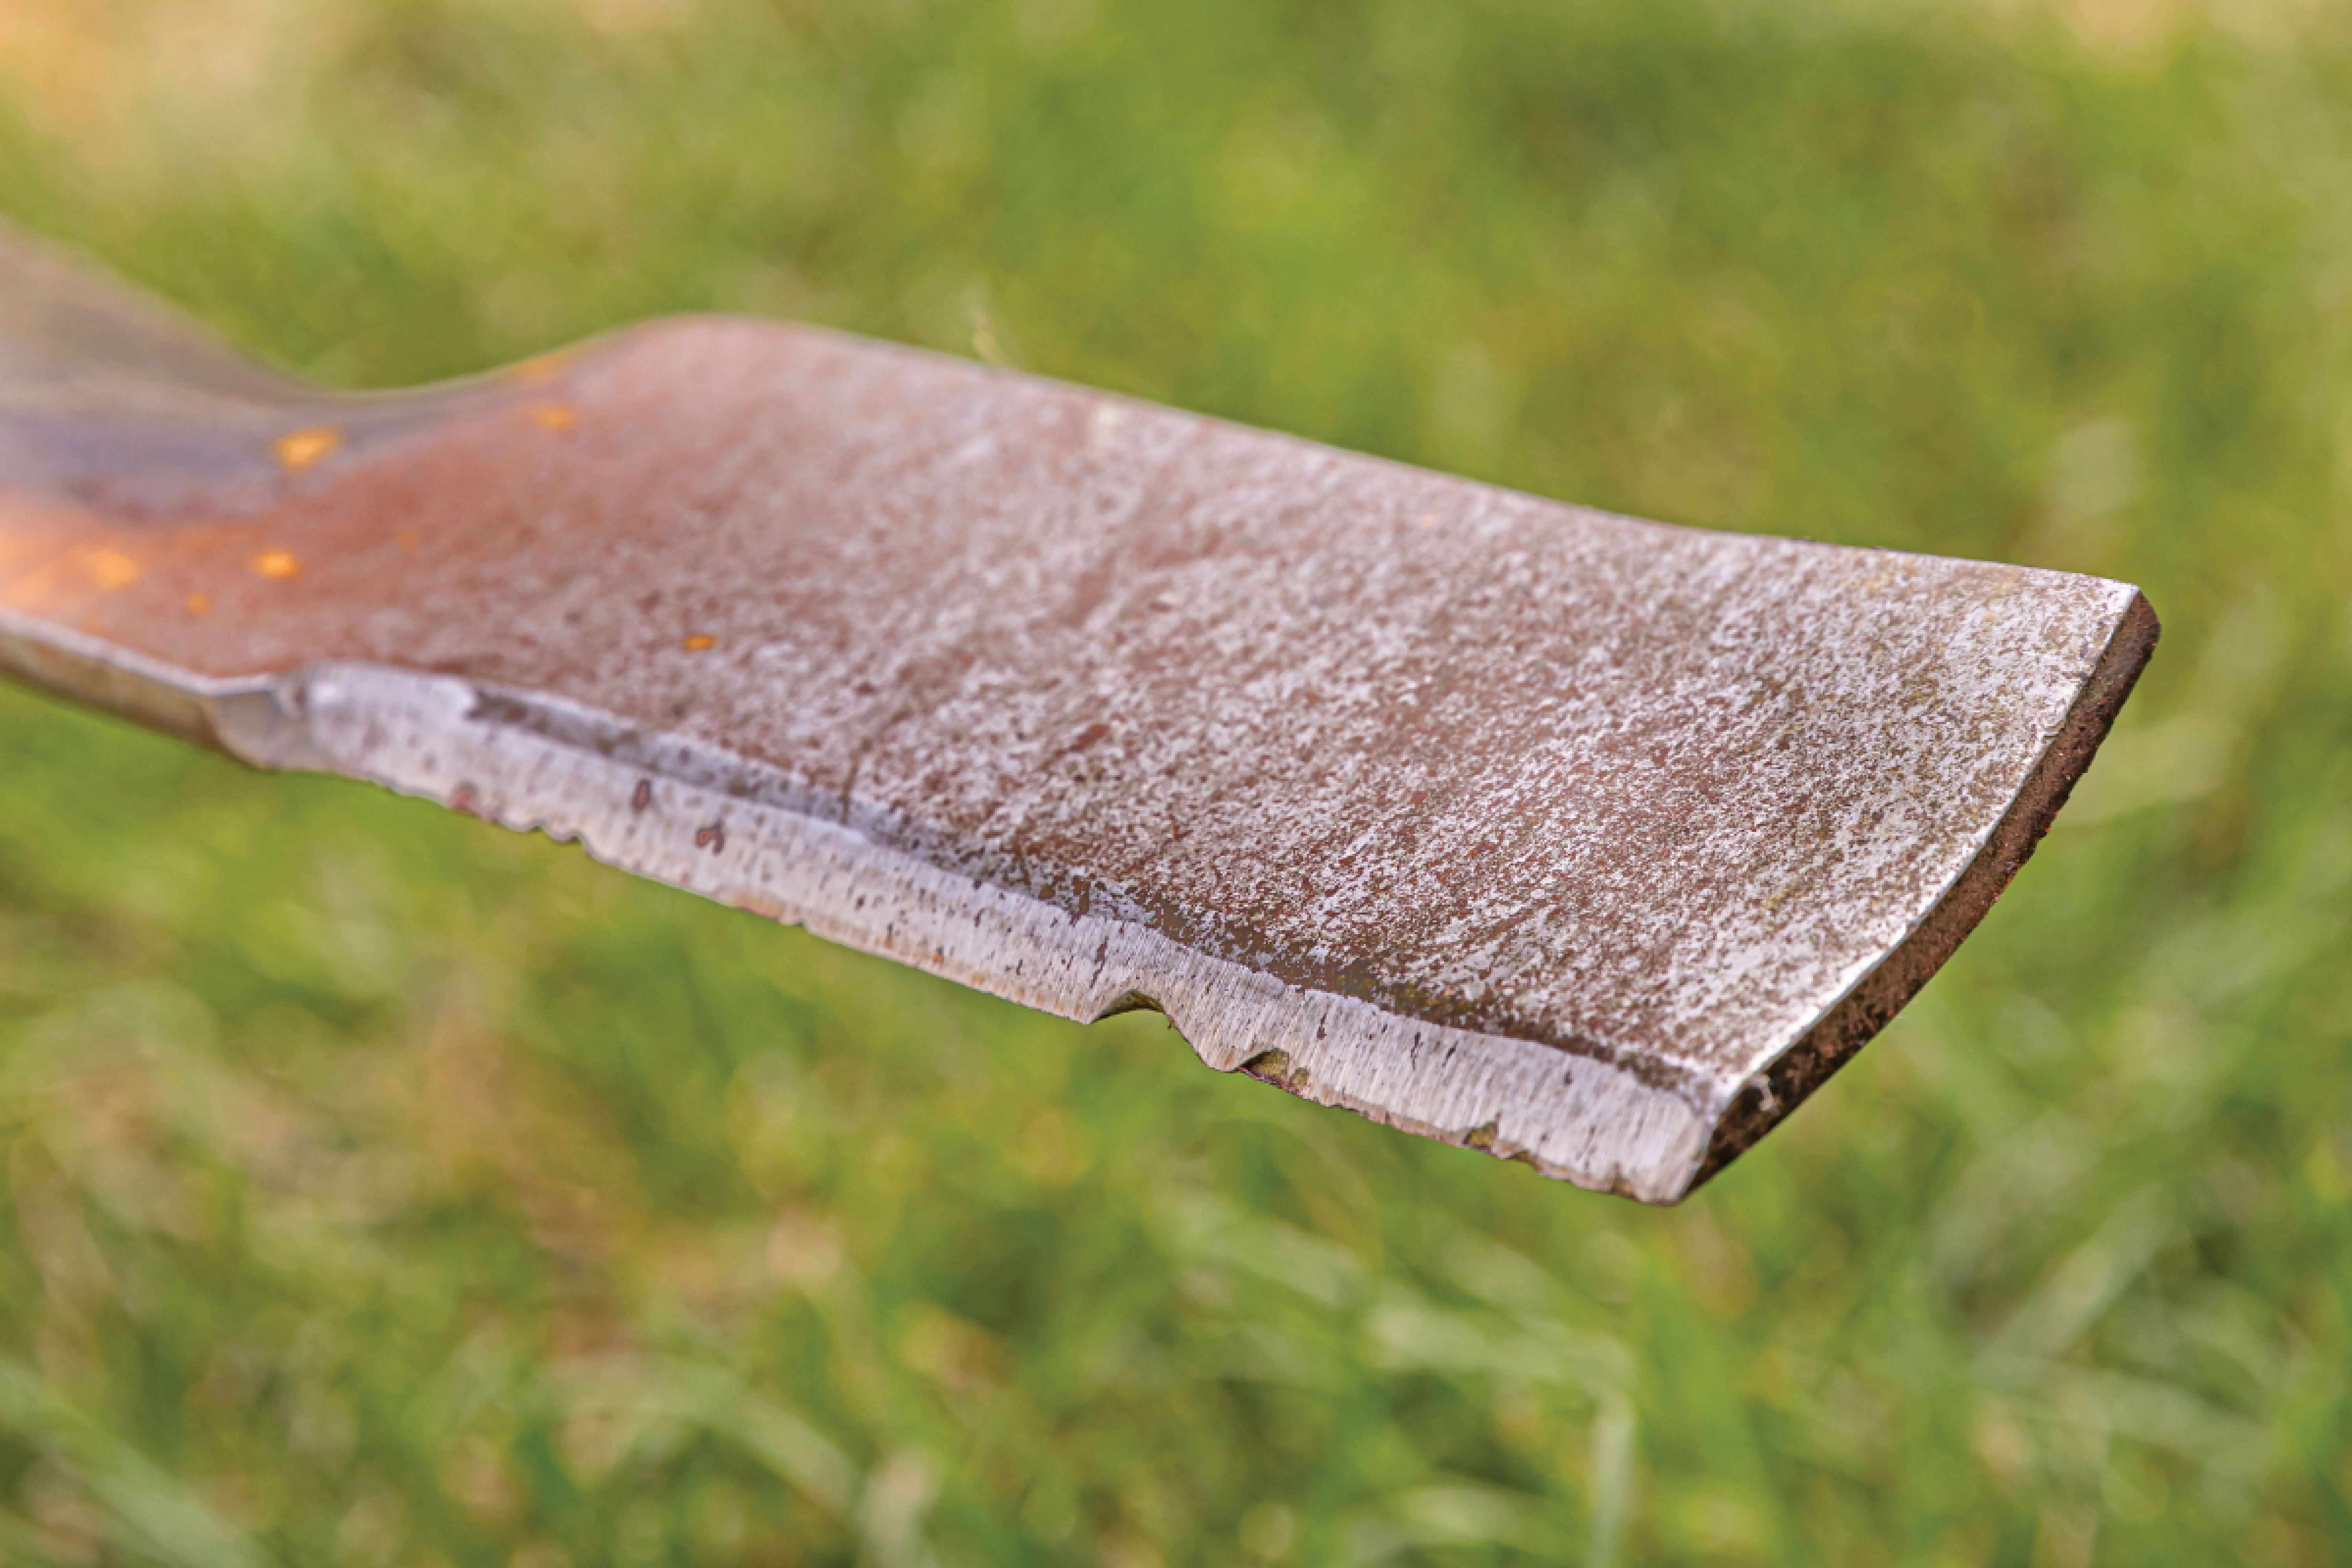 How to sharpen lawn mower blades THE CORRECT WAY ( Angle grinders will  destroy your mower blades) 